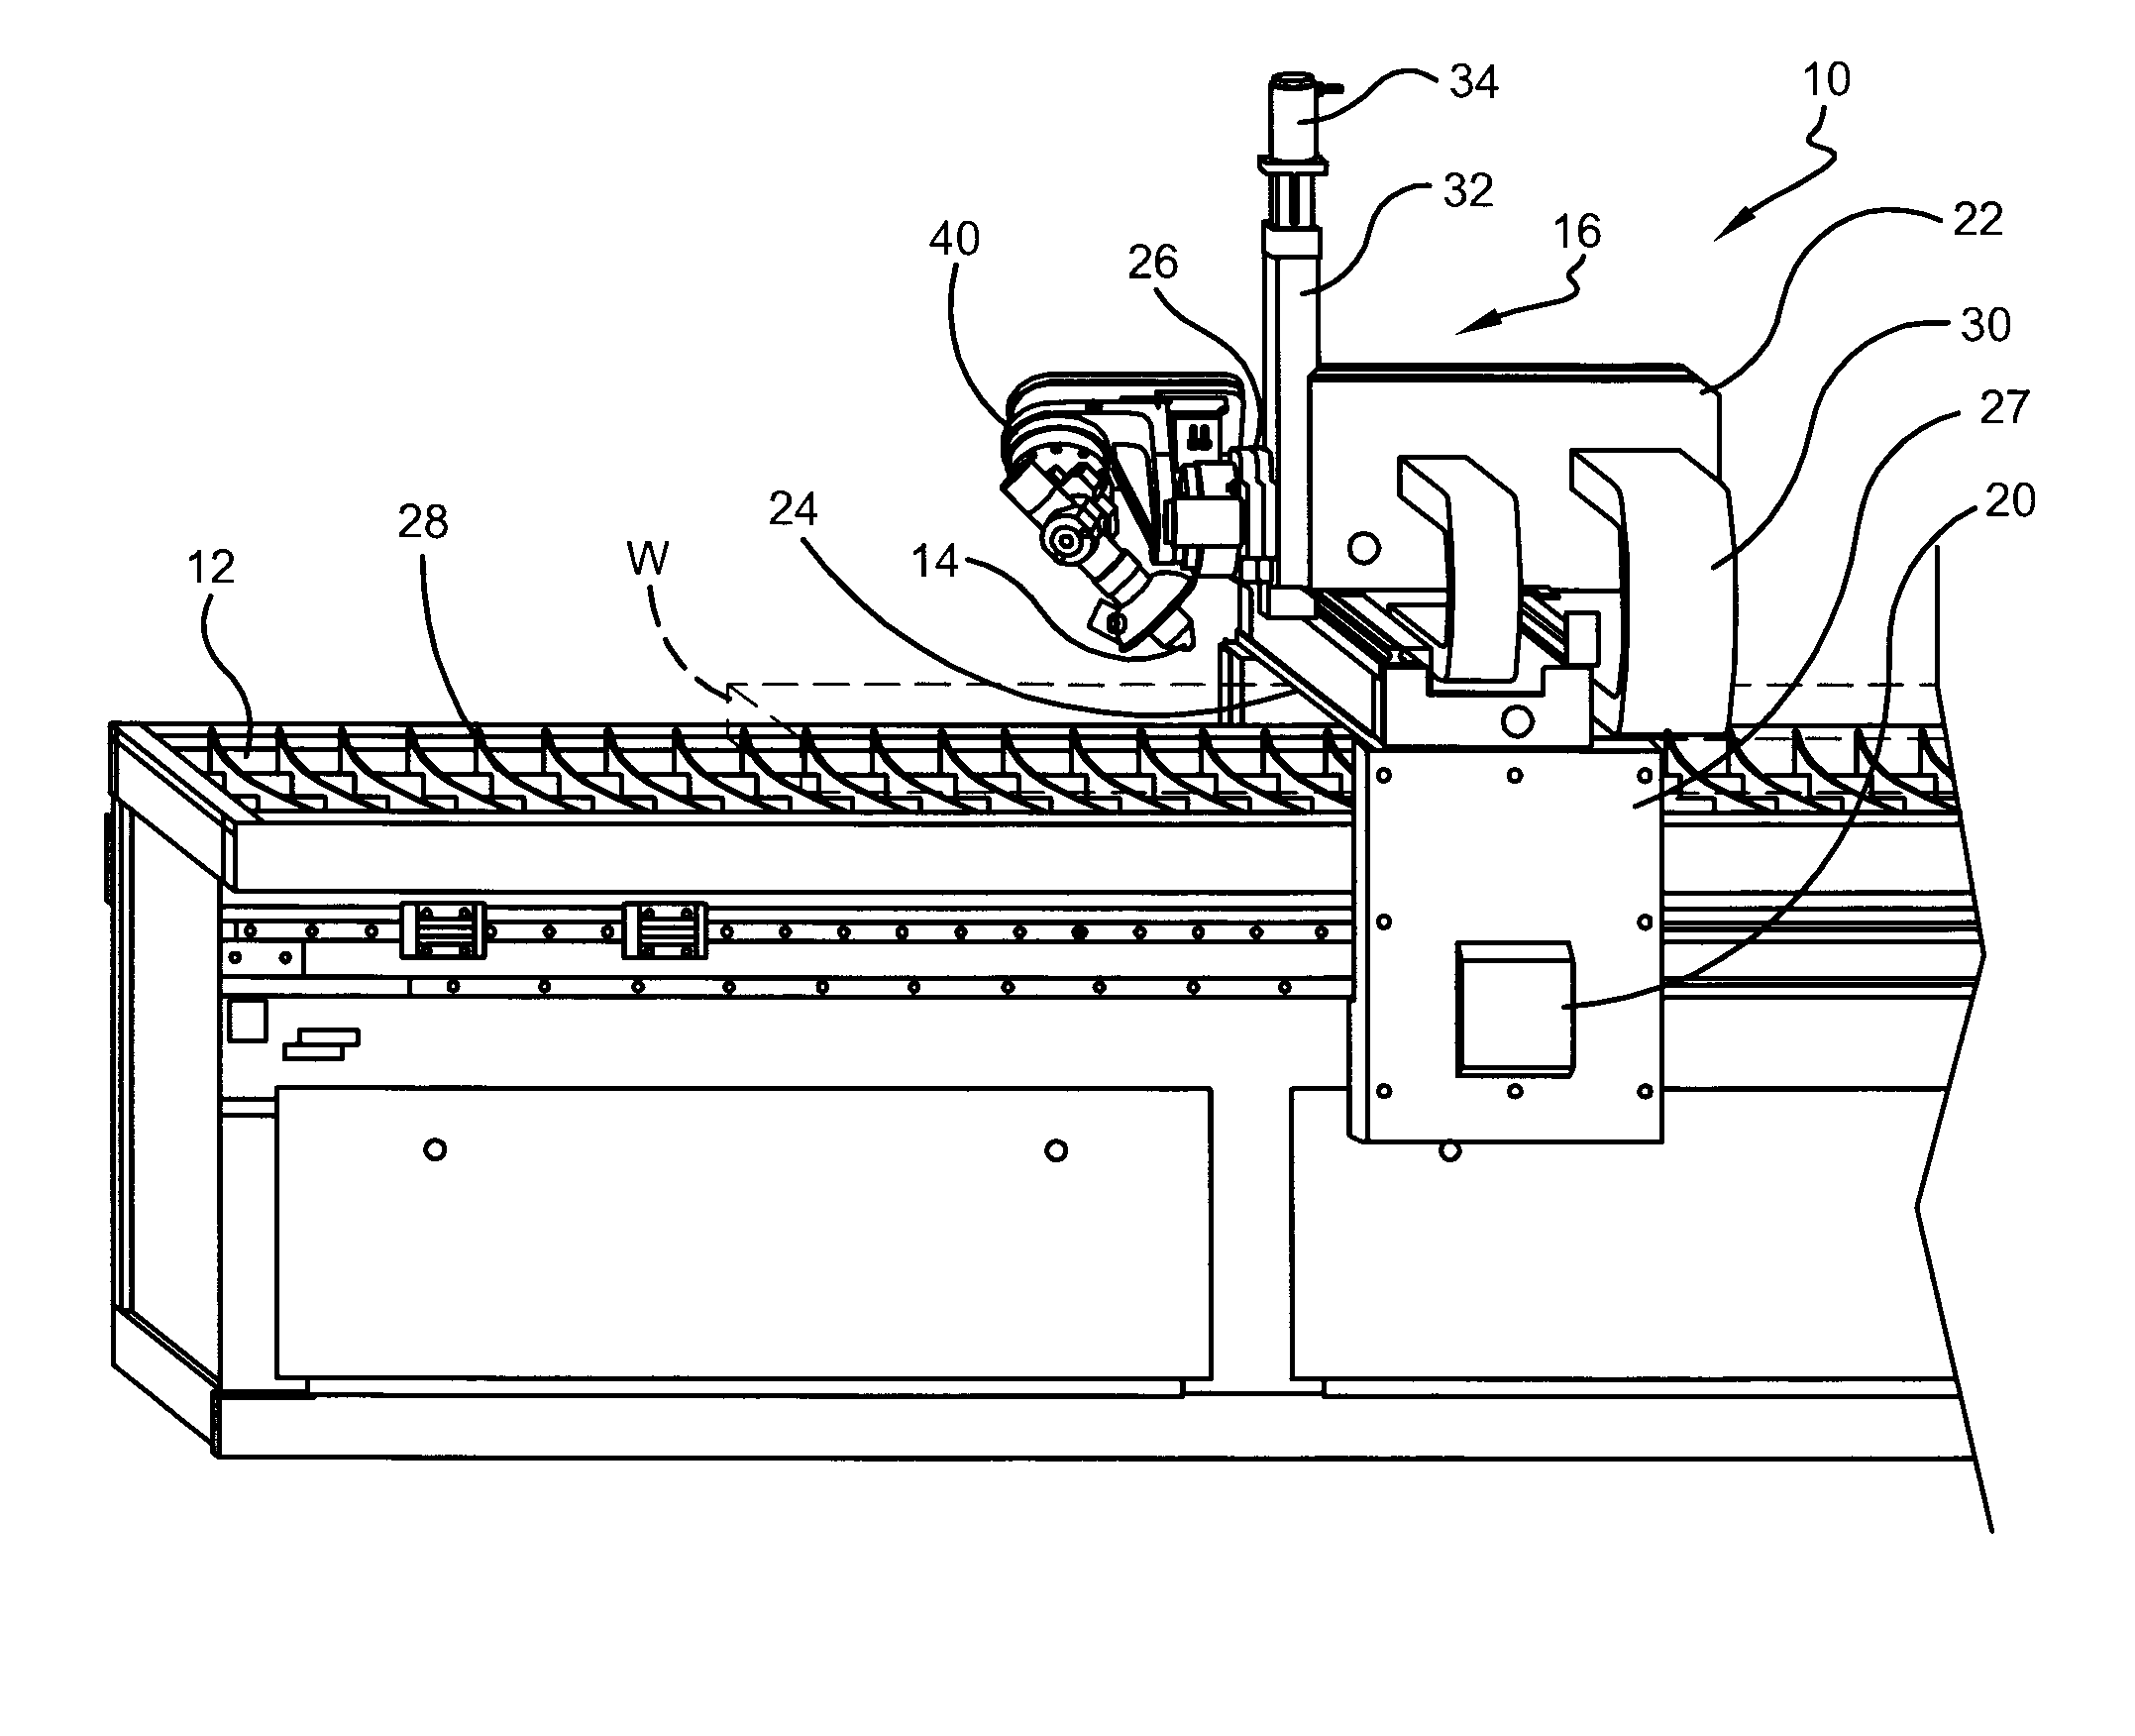 Plasma torch cutting device and process